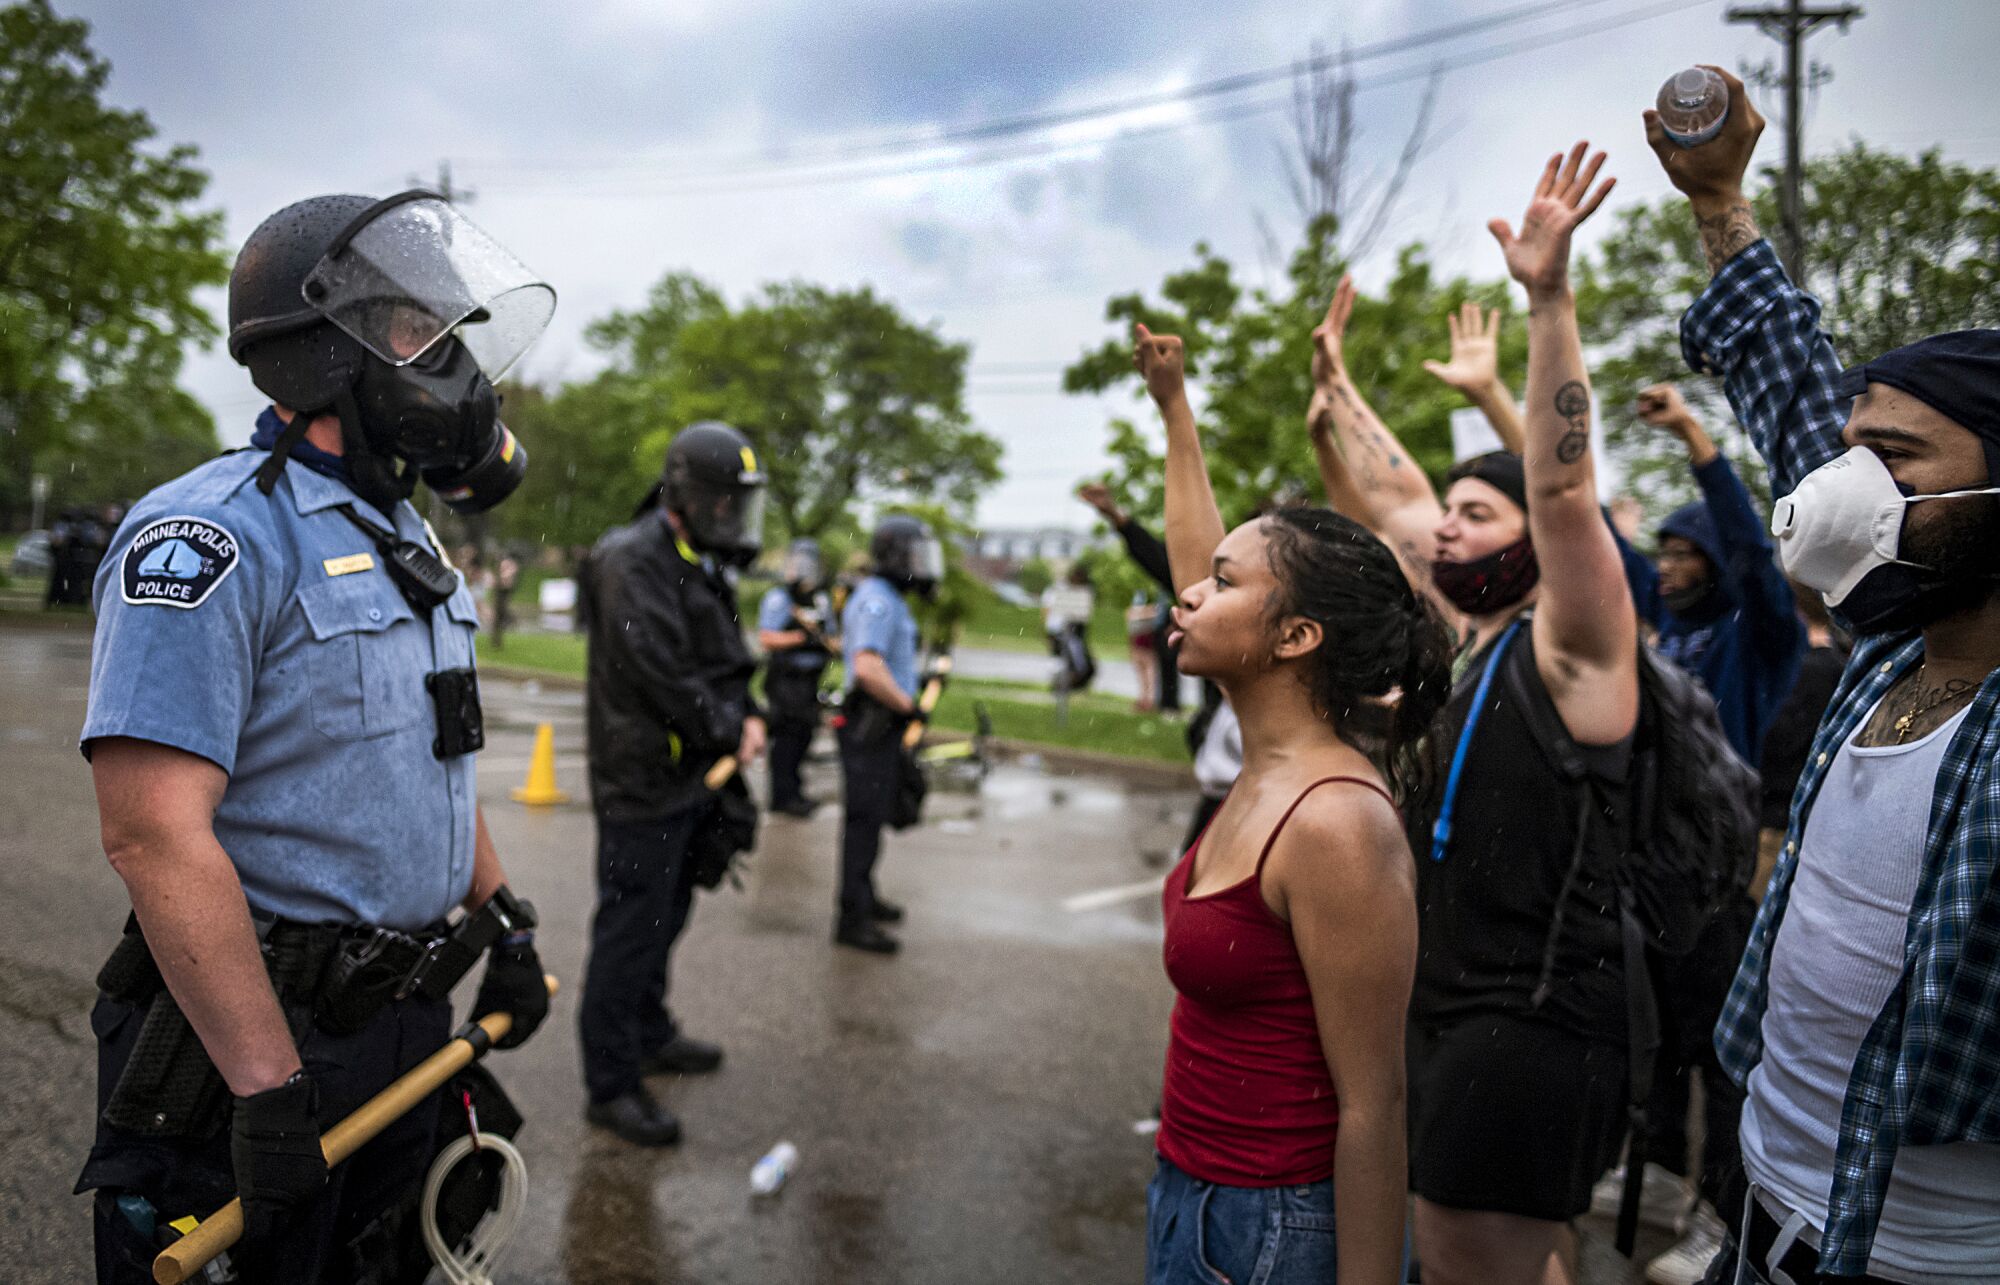 Protesters and police face each other during a rally in Minneapolis after the death of George Floyd.